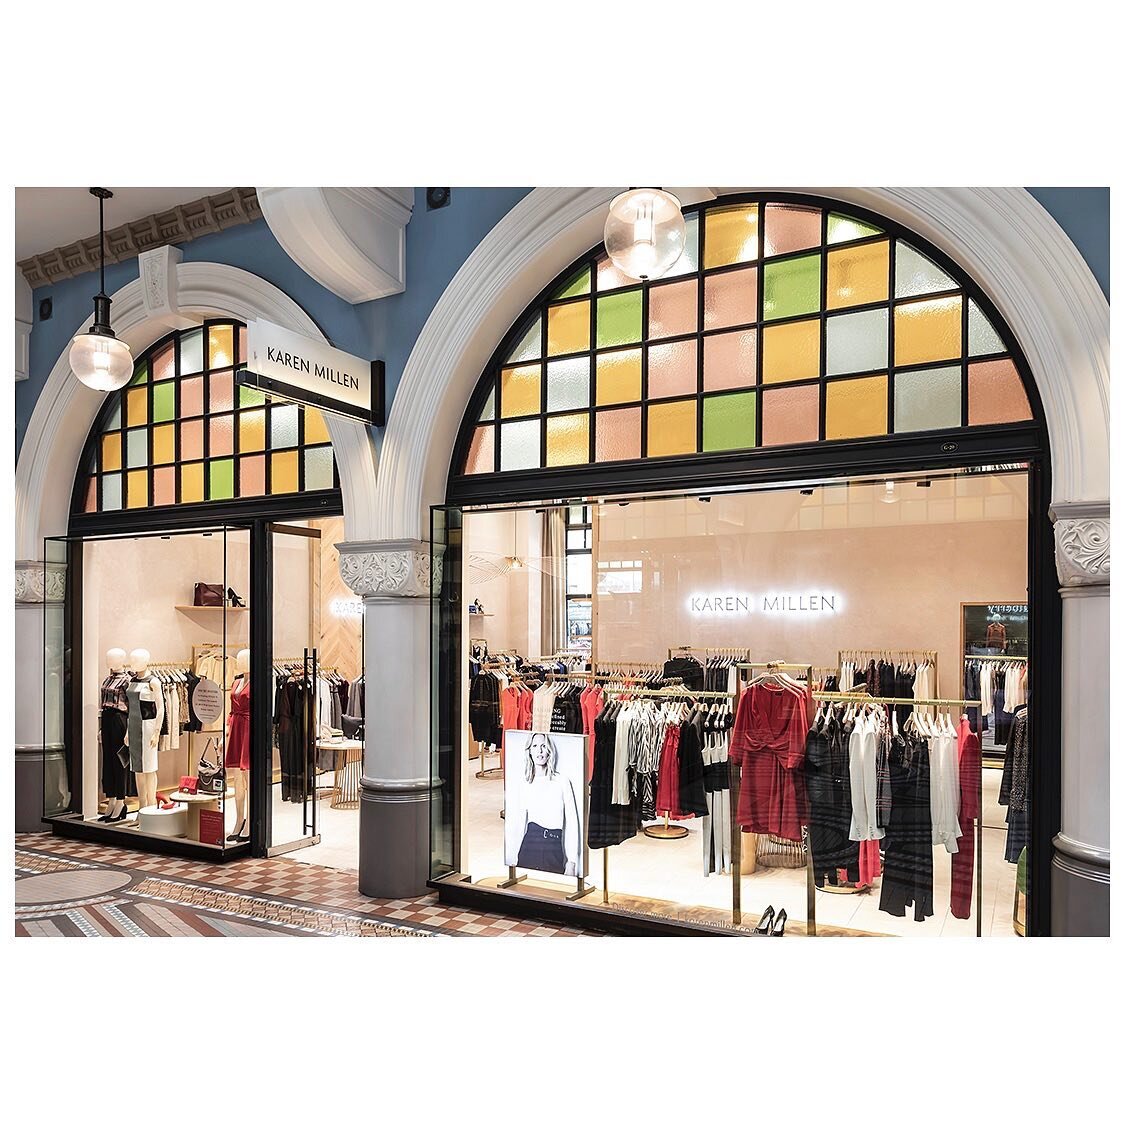 Project Archive: Karen Millen Sydney. We were brought in to create a new concept for the British brand and this launched into the Sydney store at the Queen Victoria Building.